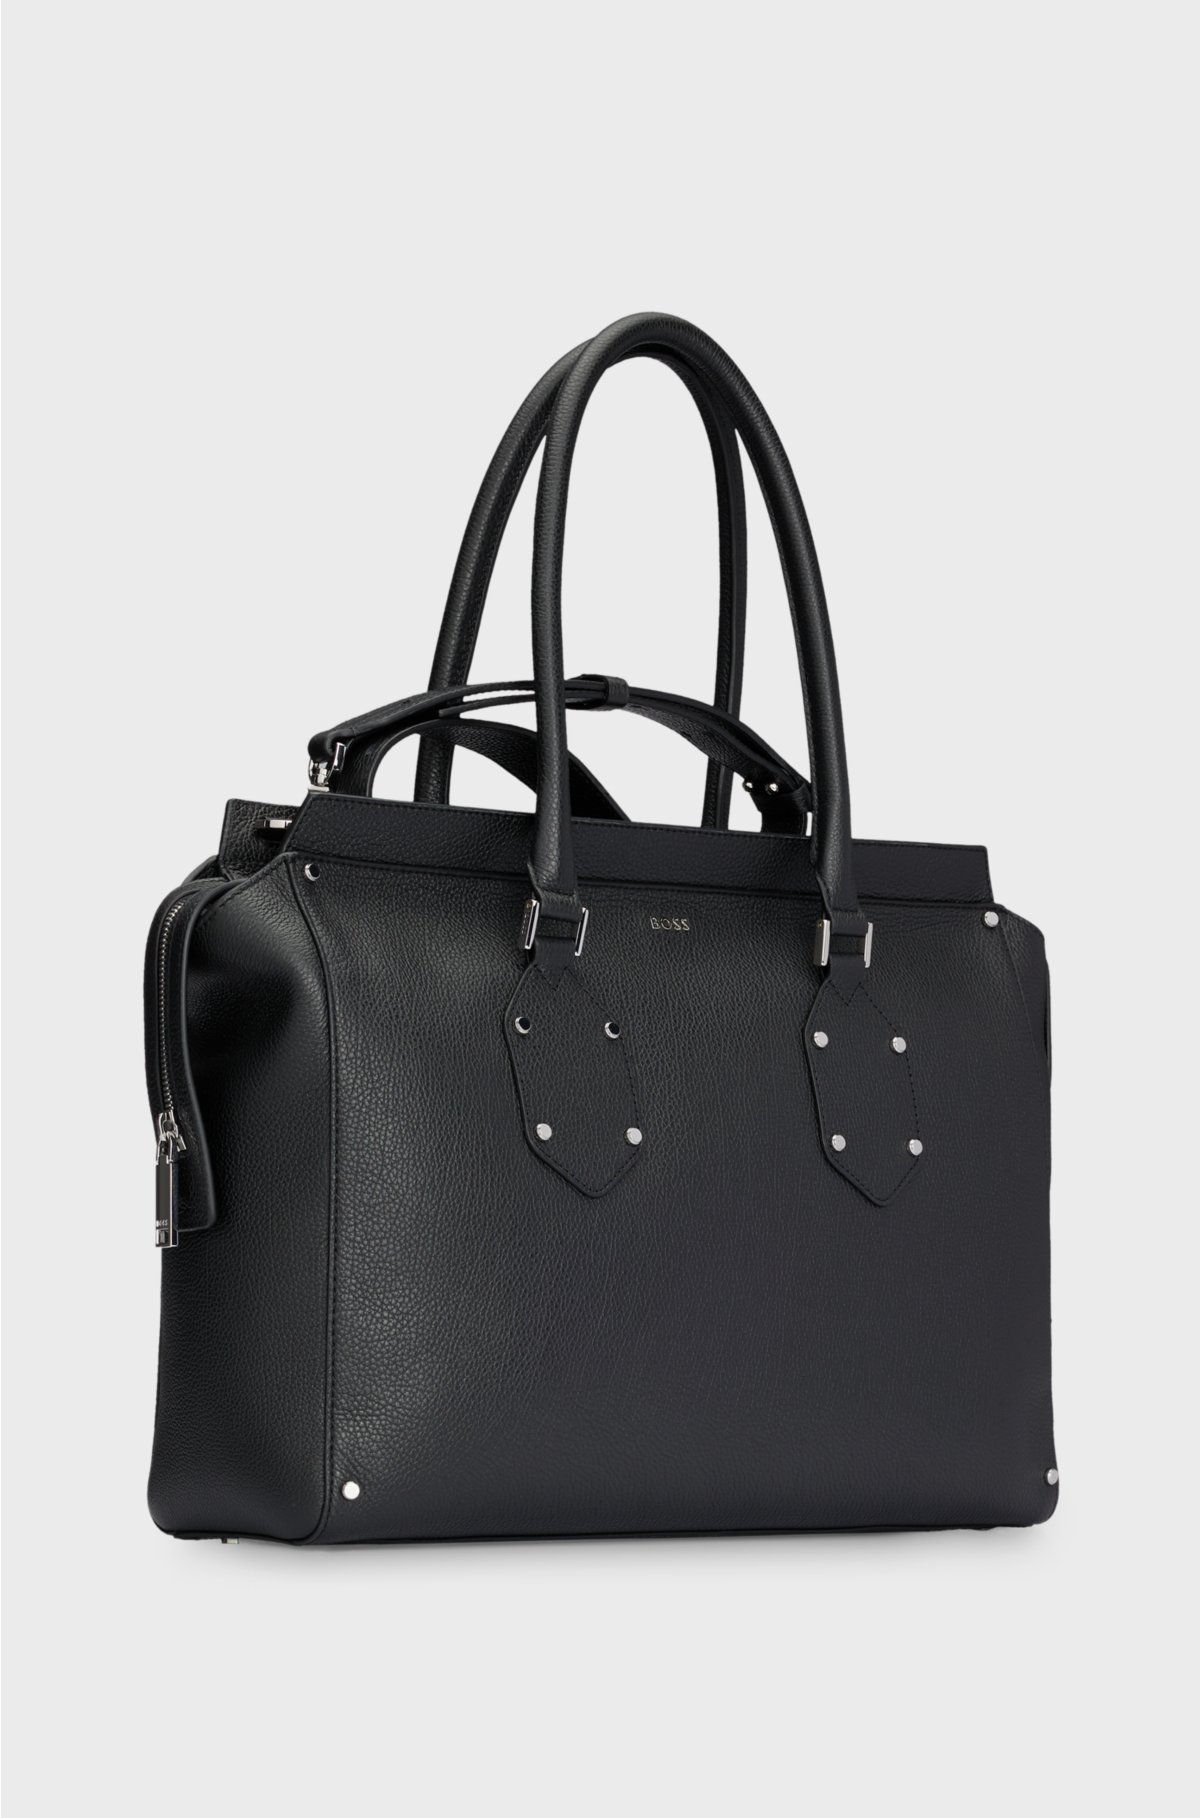 Grained-leather tote bag with detachable shoulder strap, Black